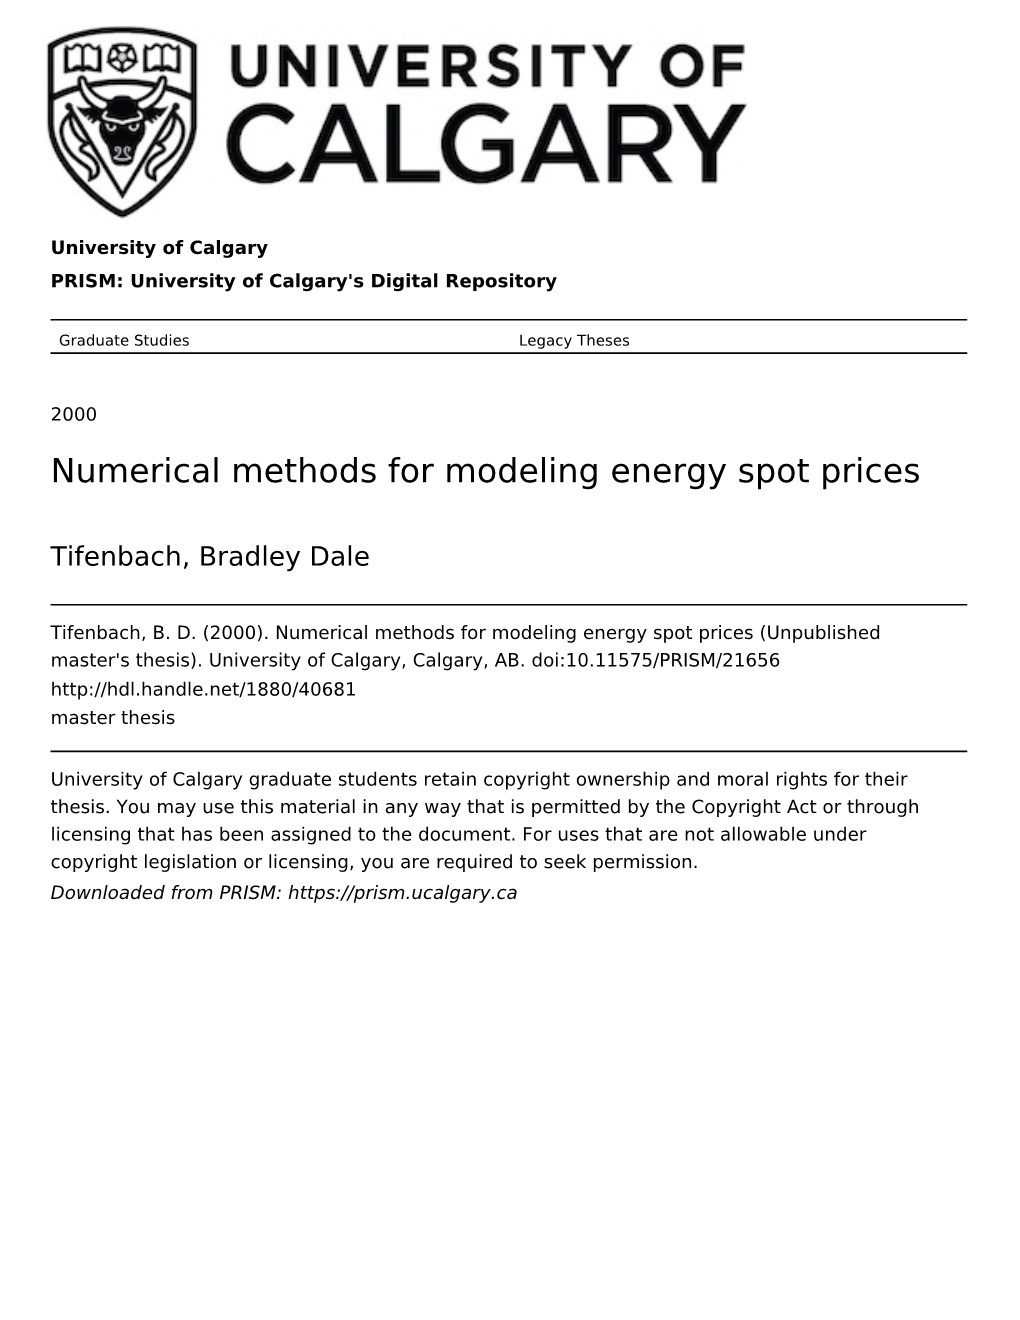 Numerical Methods for Modeling Energy Spot Prices